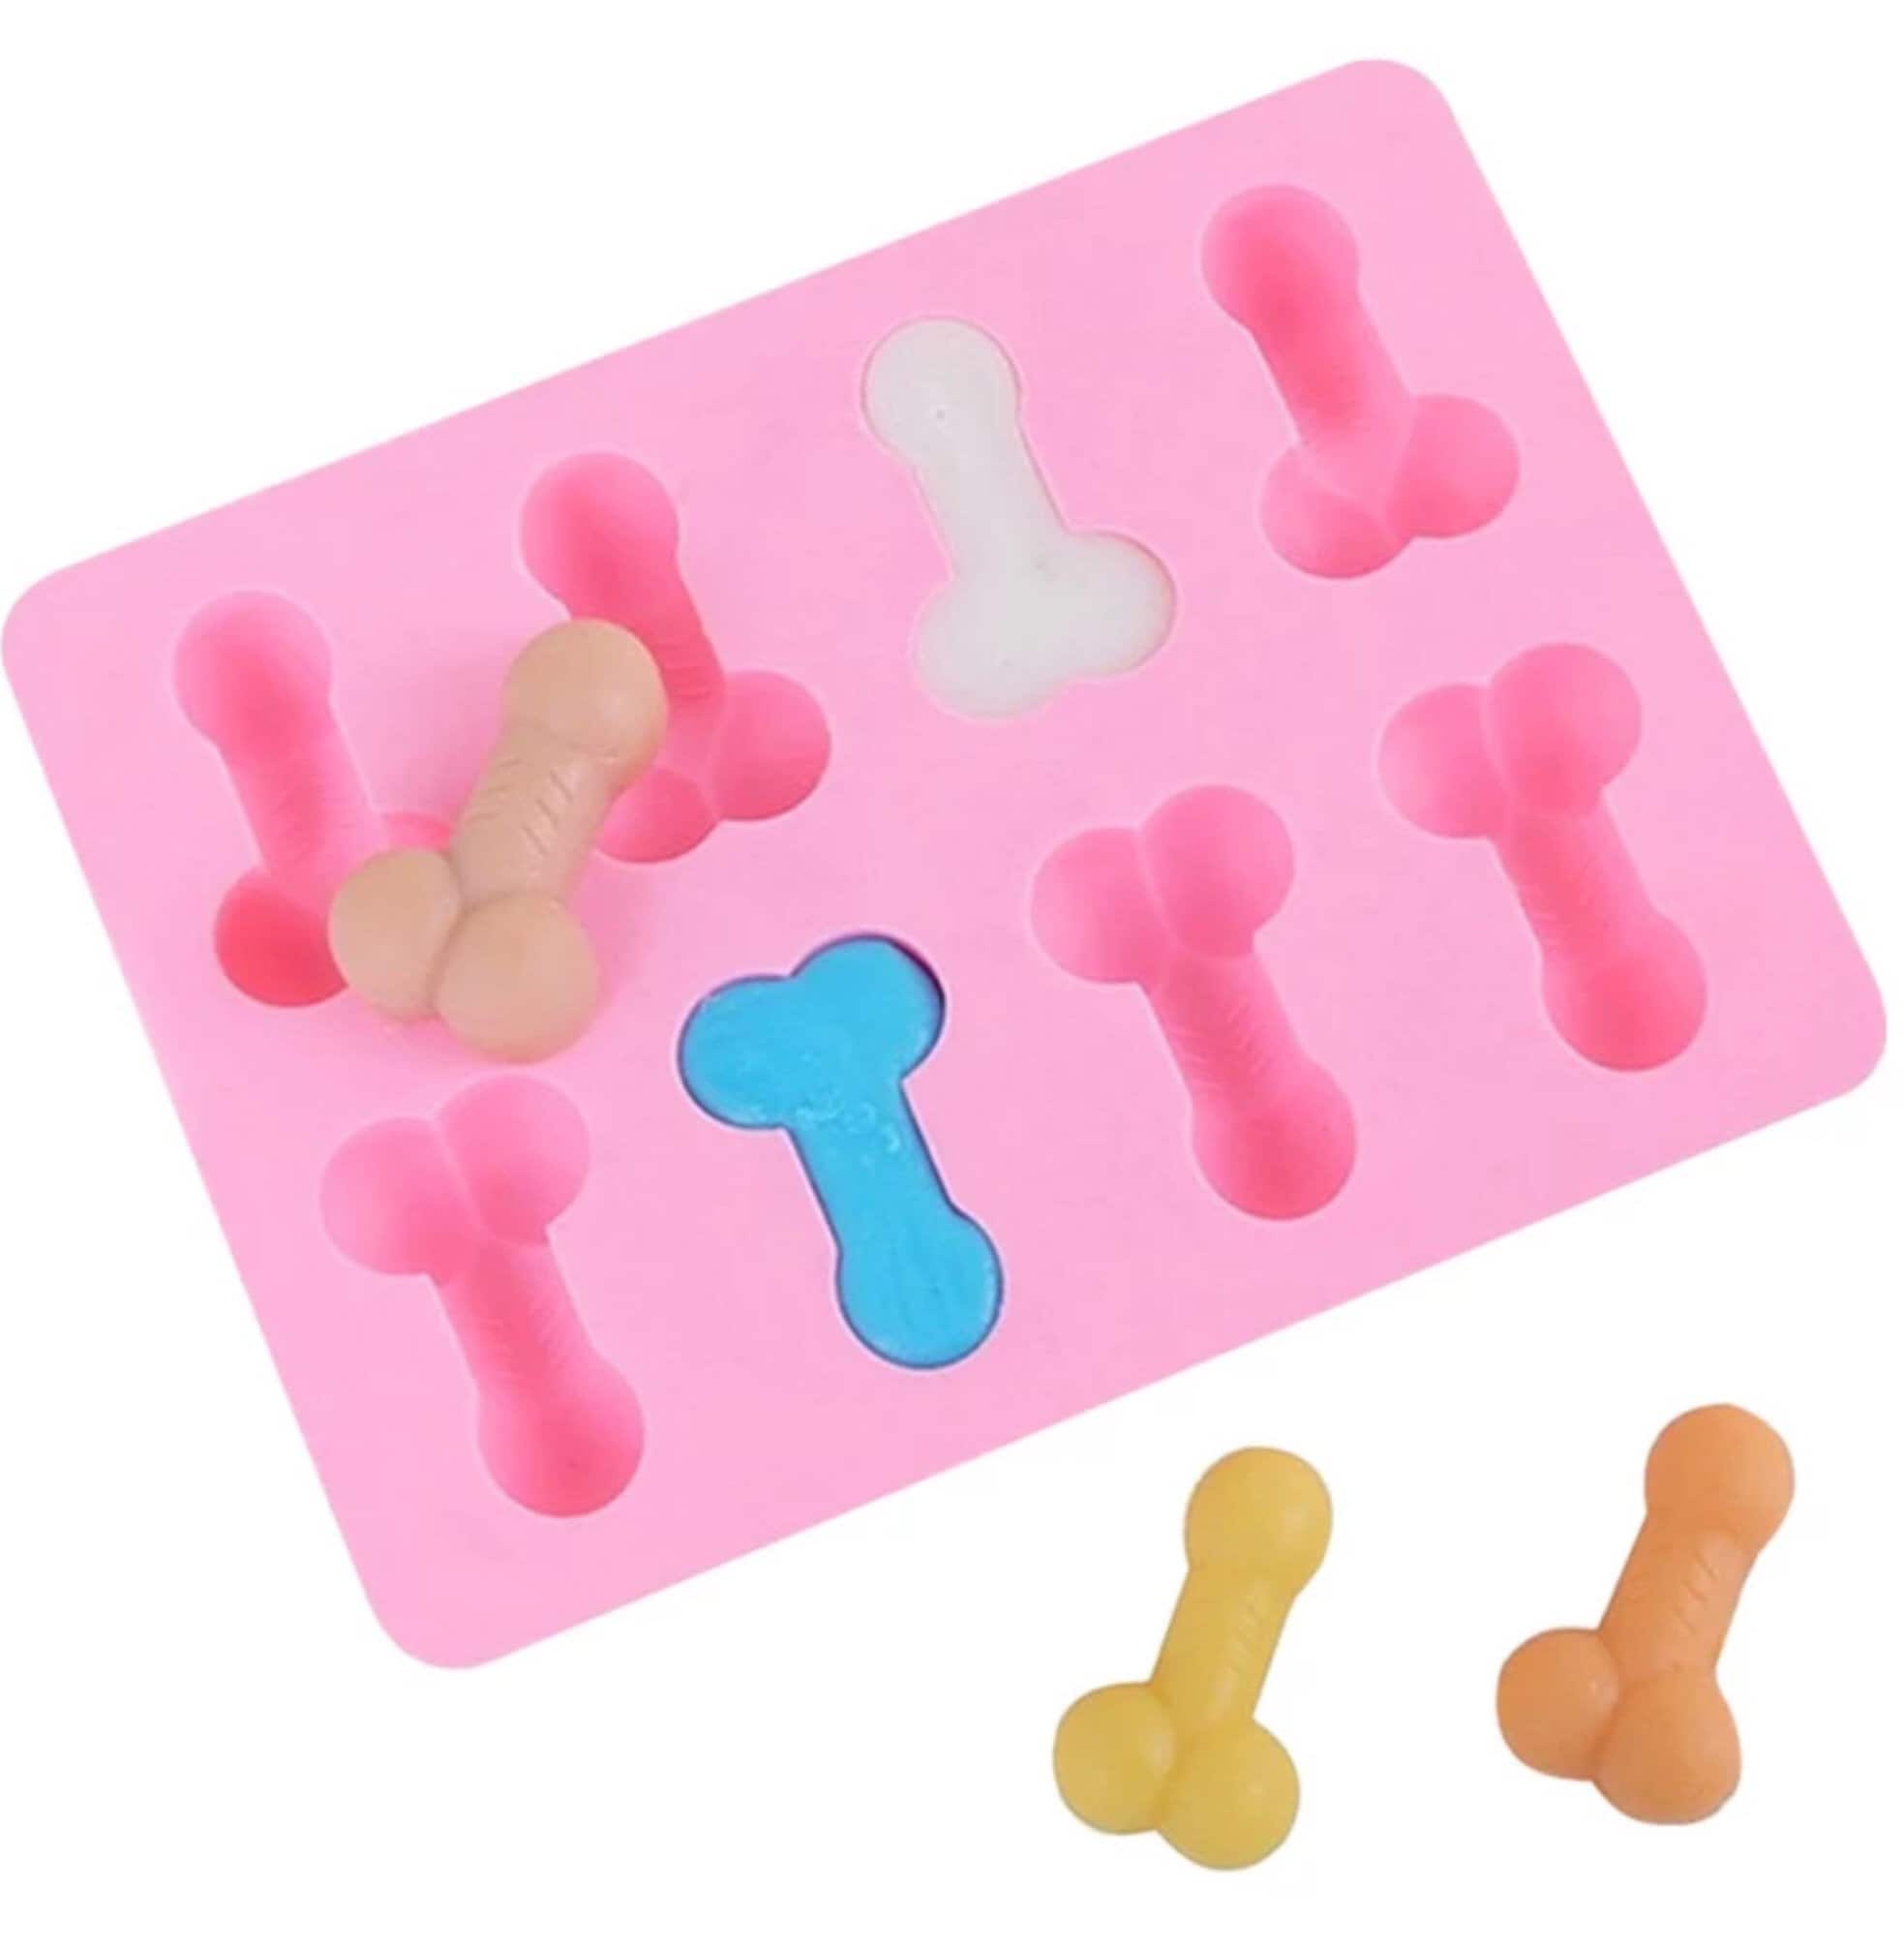  Adult Prank Funny Ice Cube Tray for Gag Party Joke Gifts,Adult  Prank Ice Cube Mold,Adult Ice Cube Molds,Penis Ice Cube Mold,Silicone Ice  Cube Mold for Ice Chilling Cocktail Whiskey: Home 